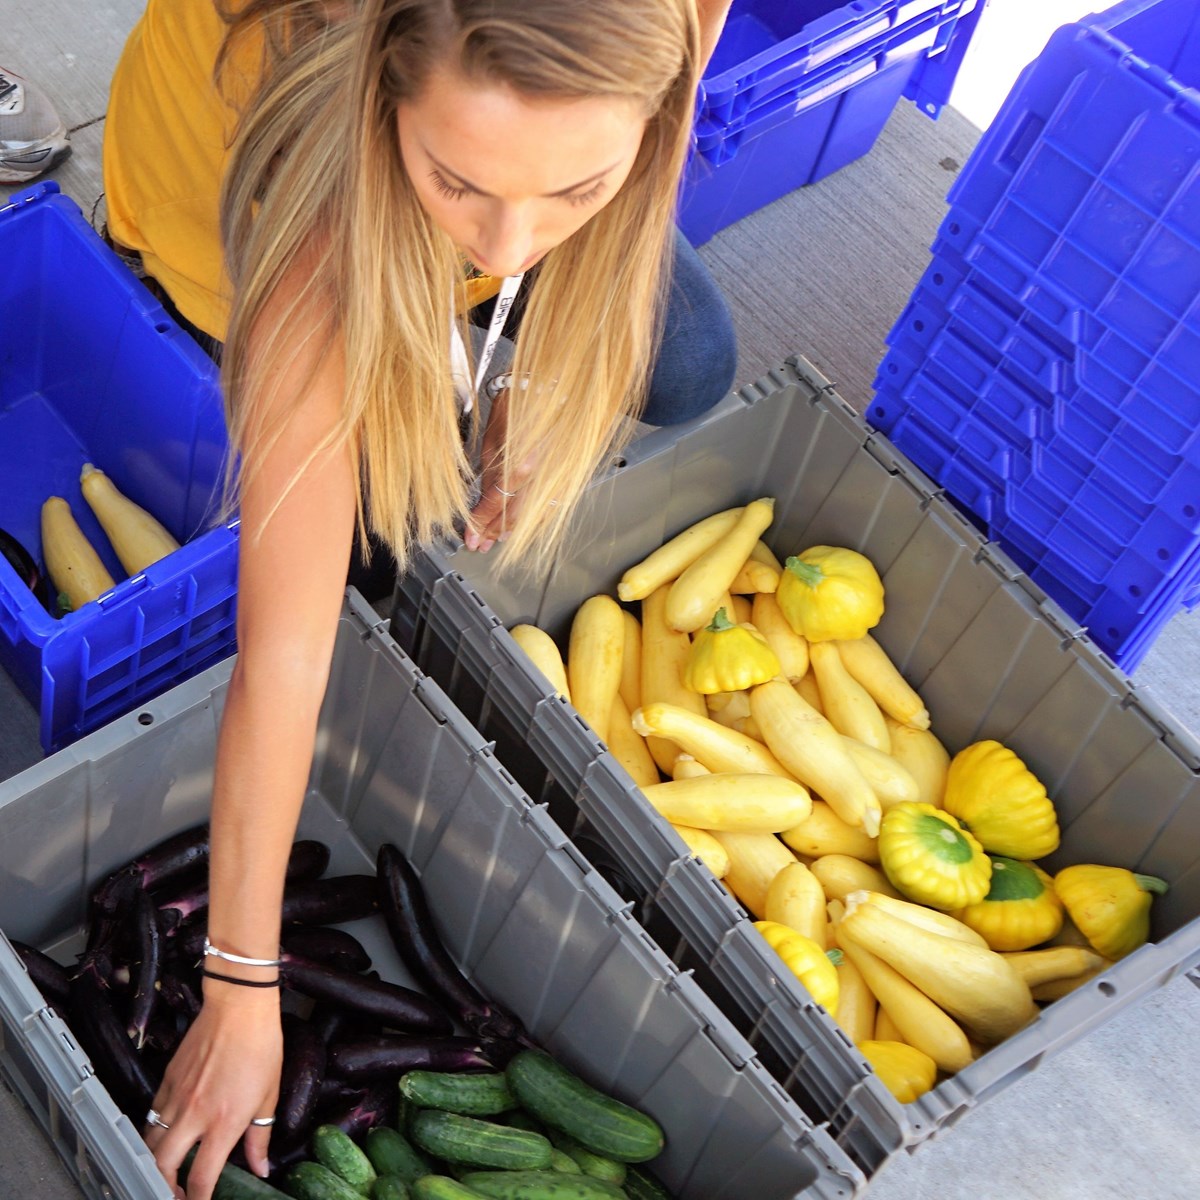 A person reaches across bins of vegetable to pick up a cucumber.